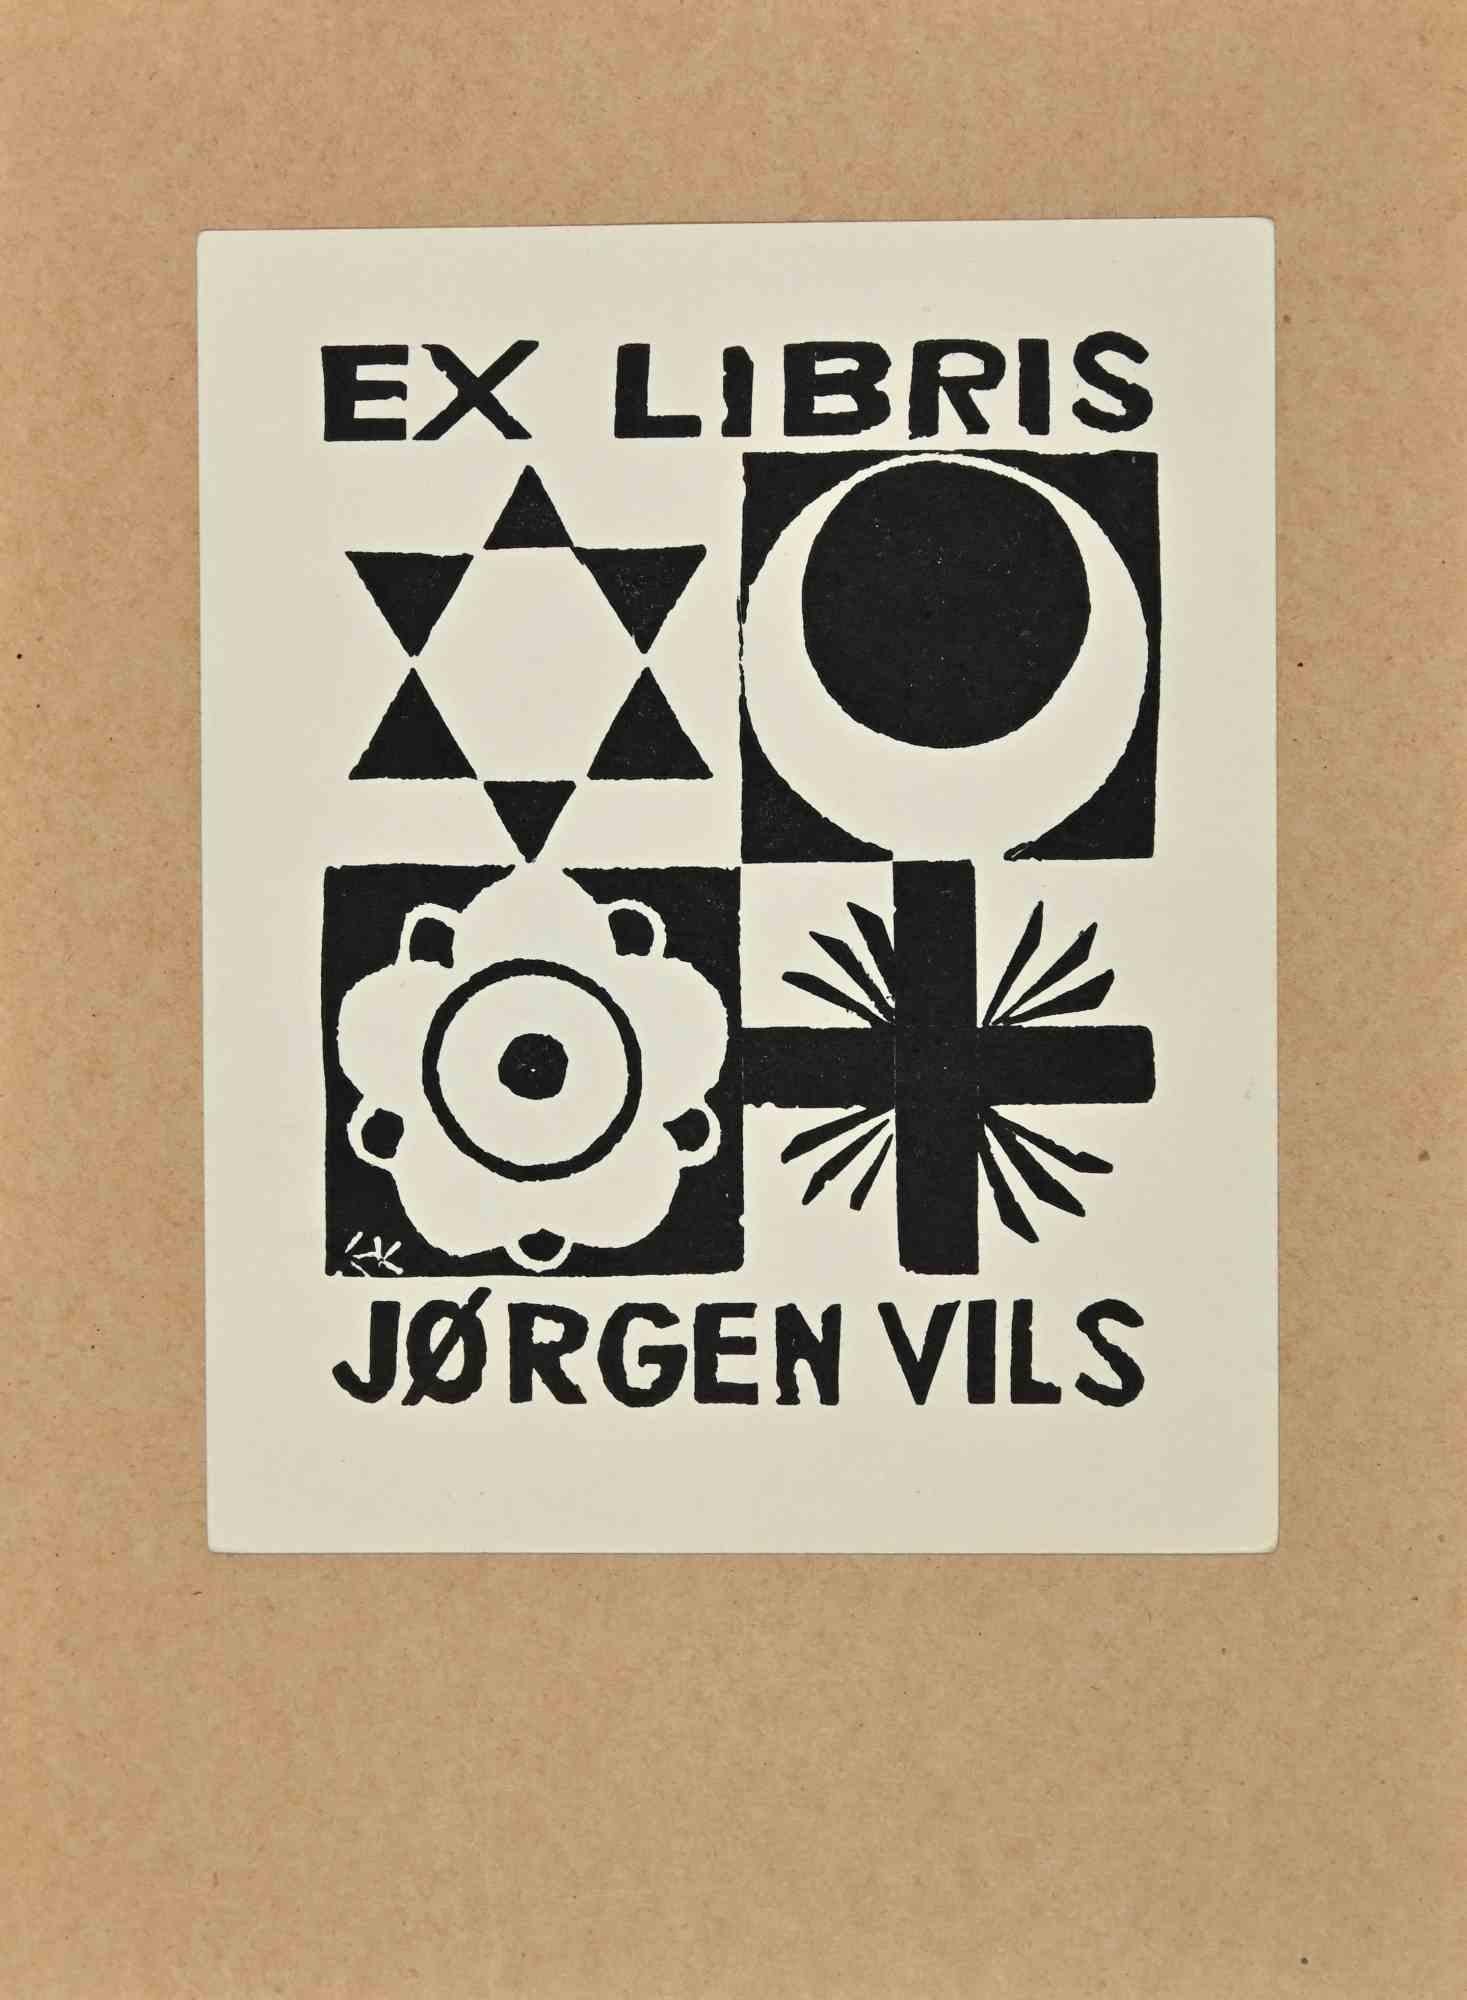 Ex Libris  - Jorgen Vils is a Modern Artwork realized in second half 20th. Century by Jorgen Vils Pedersen.

Ex Libris. B/W woodcut on ivory paper.  

The work is glued on cardboard.

Total dimensions: 20x 15 cm.

Excellent conditions.

The artwork